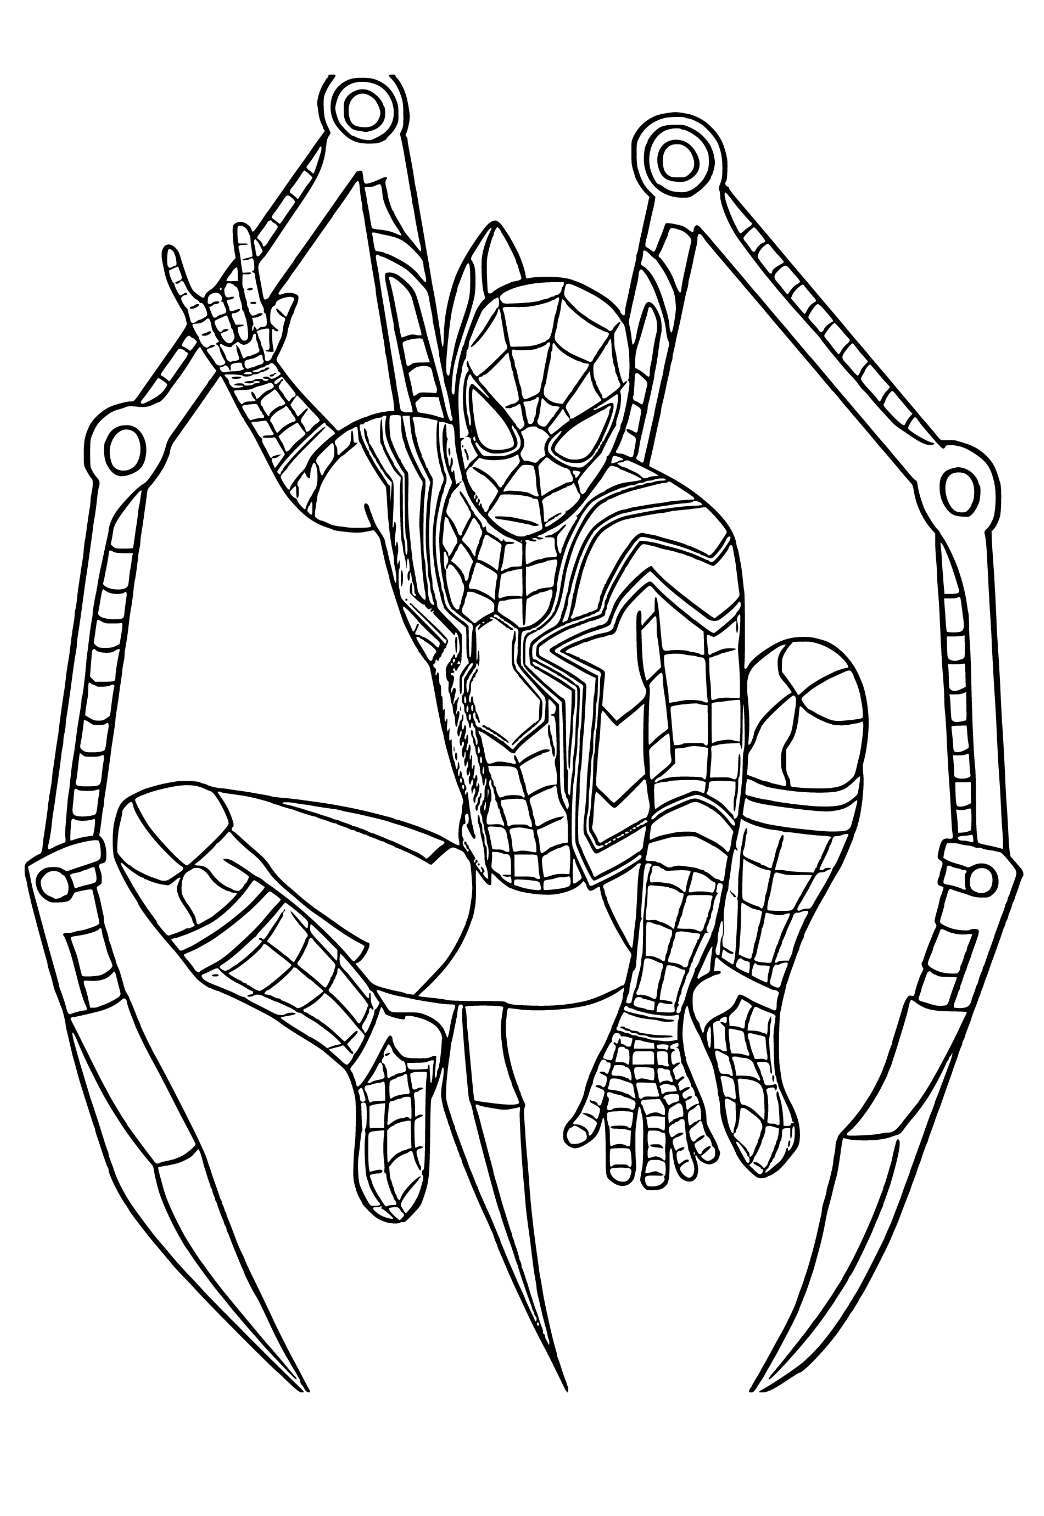 Free printable miles morales tentacles coloring page for adults and kids